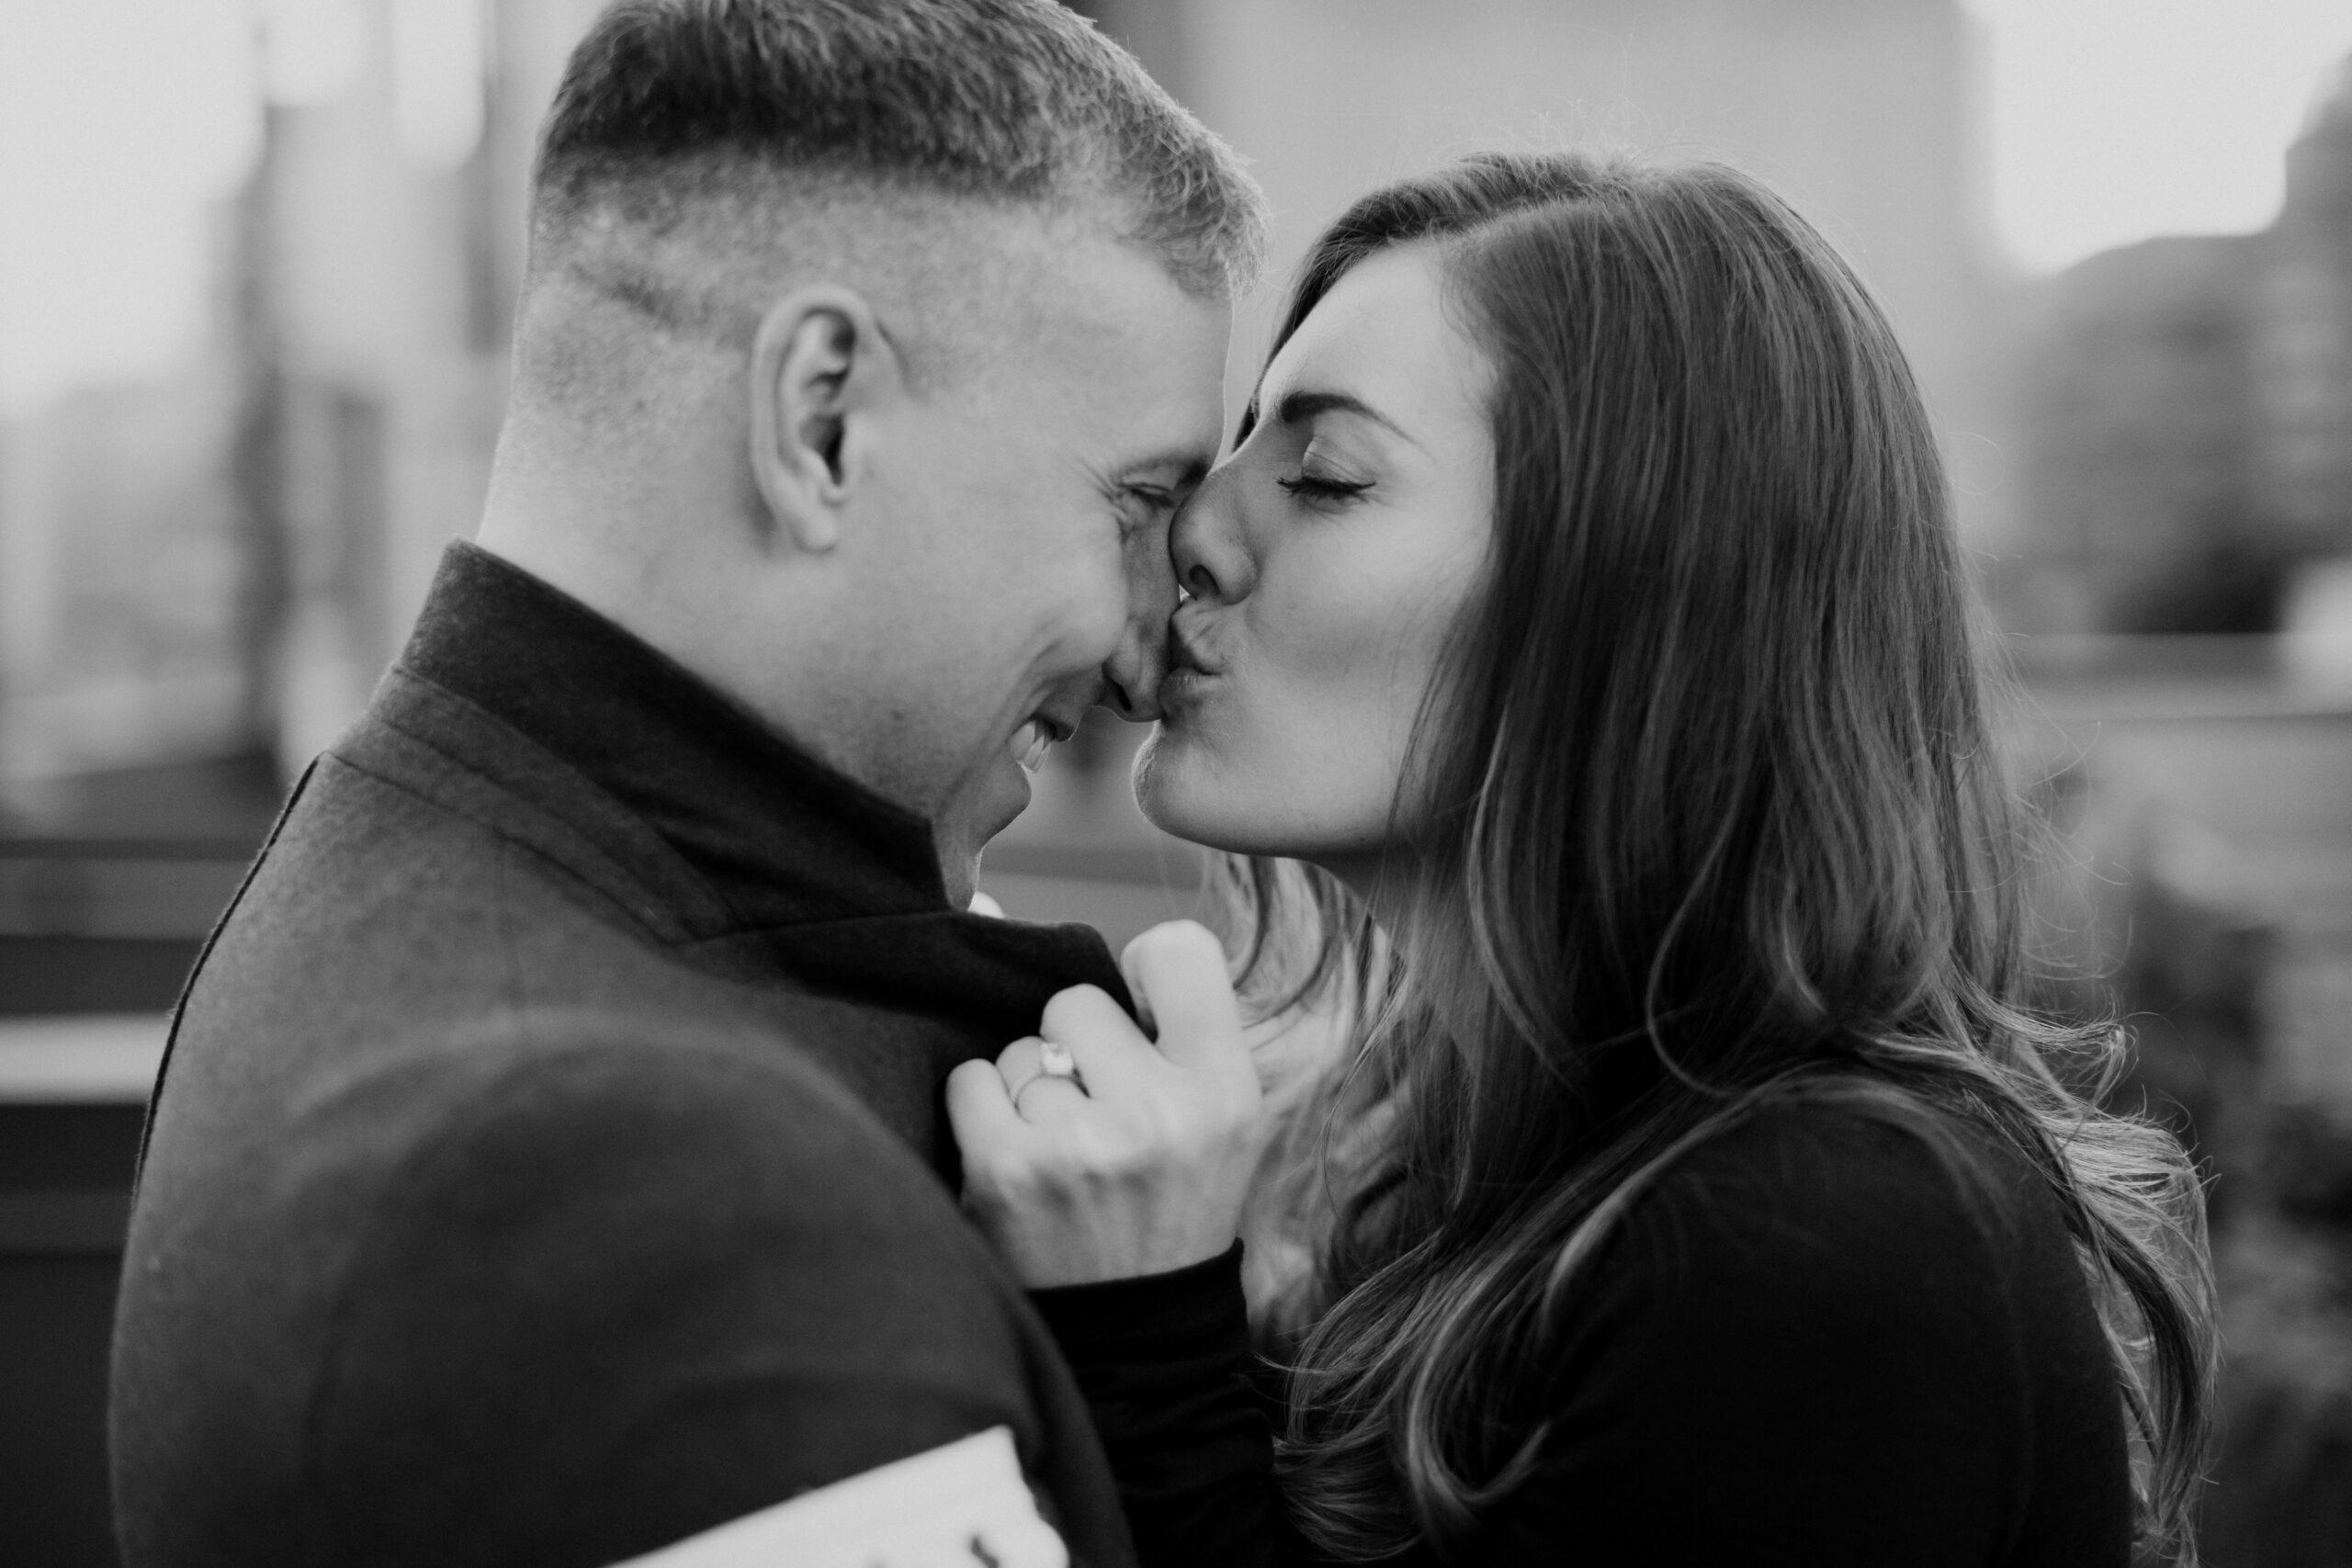 fiance kissing partner in black and white photo. 